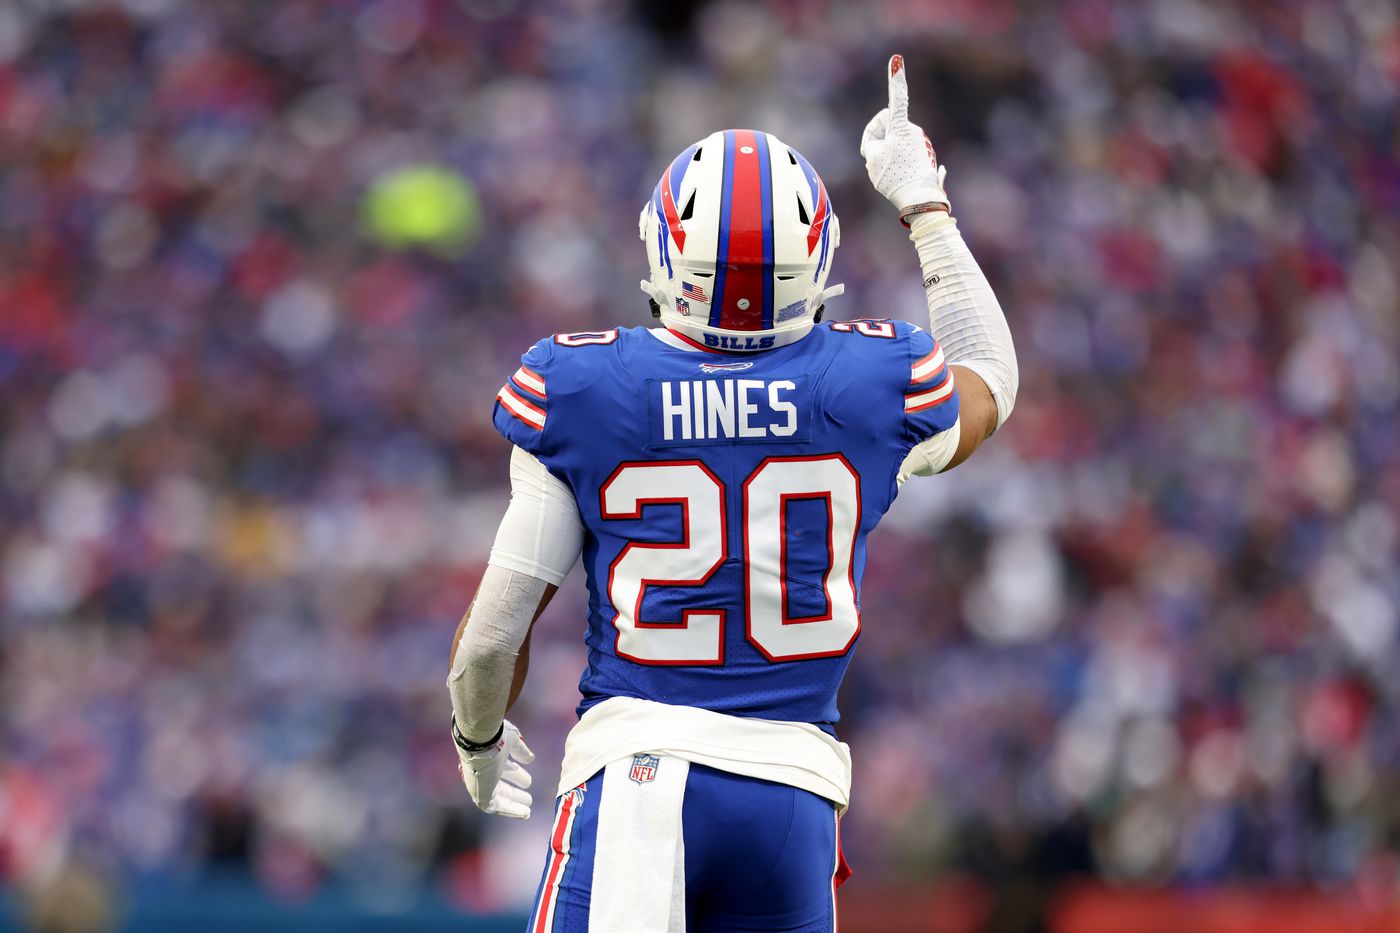 New details about the season-ending accident involving Buffalo Bills RB Nyheim Hines